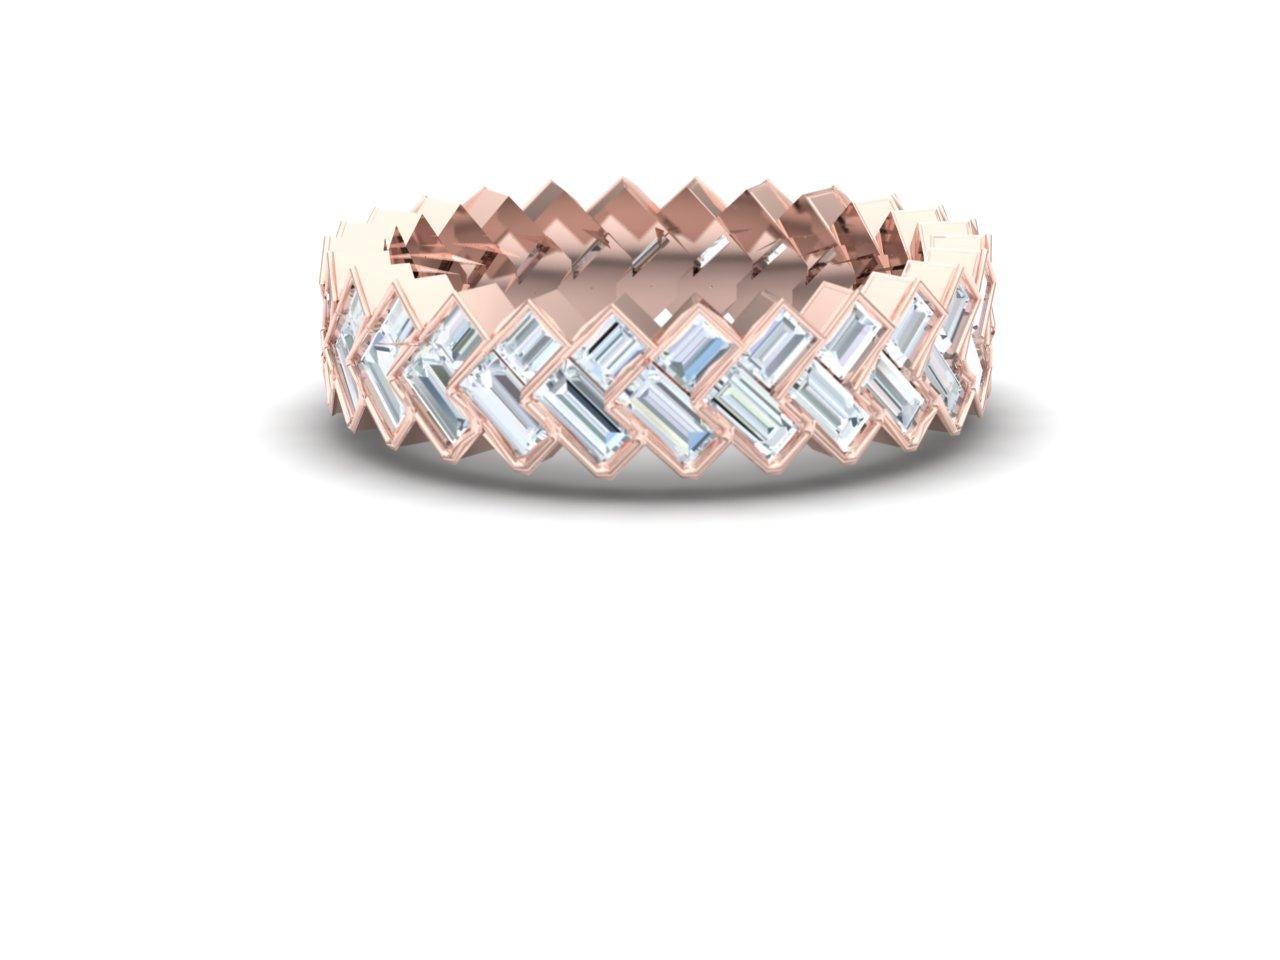 A gorgeous herringbone design diamond band is a perfect accent band to any diamond engagement ring or stacker band.  This stunning stacked chevron looks gives the wearer a taste of diamond and negative space maing it perfect to pair with any diamond